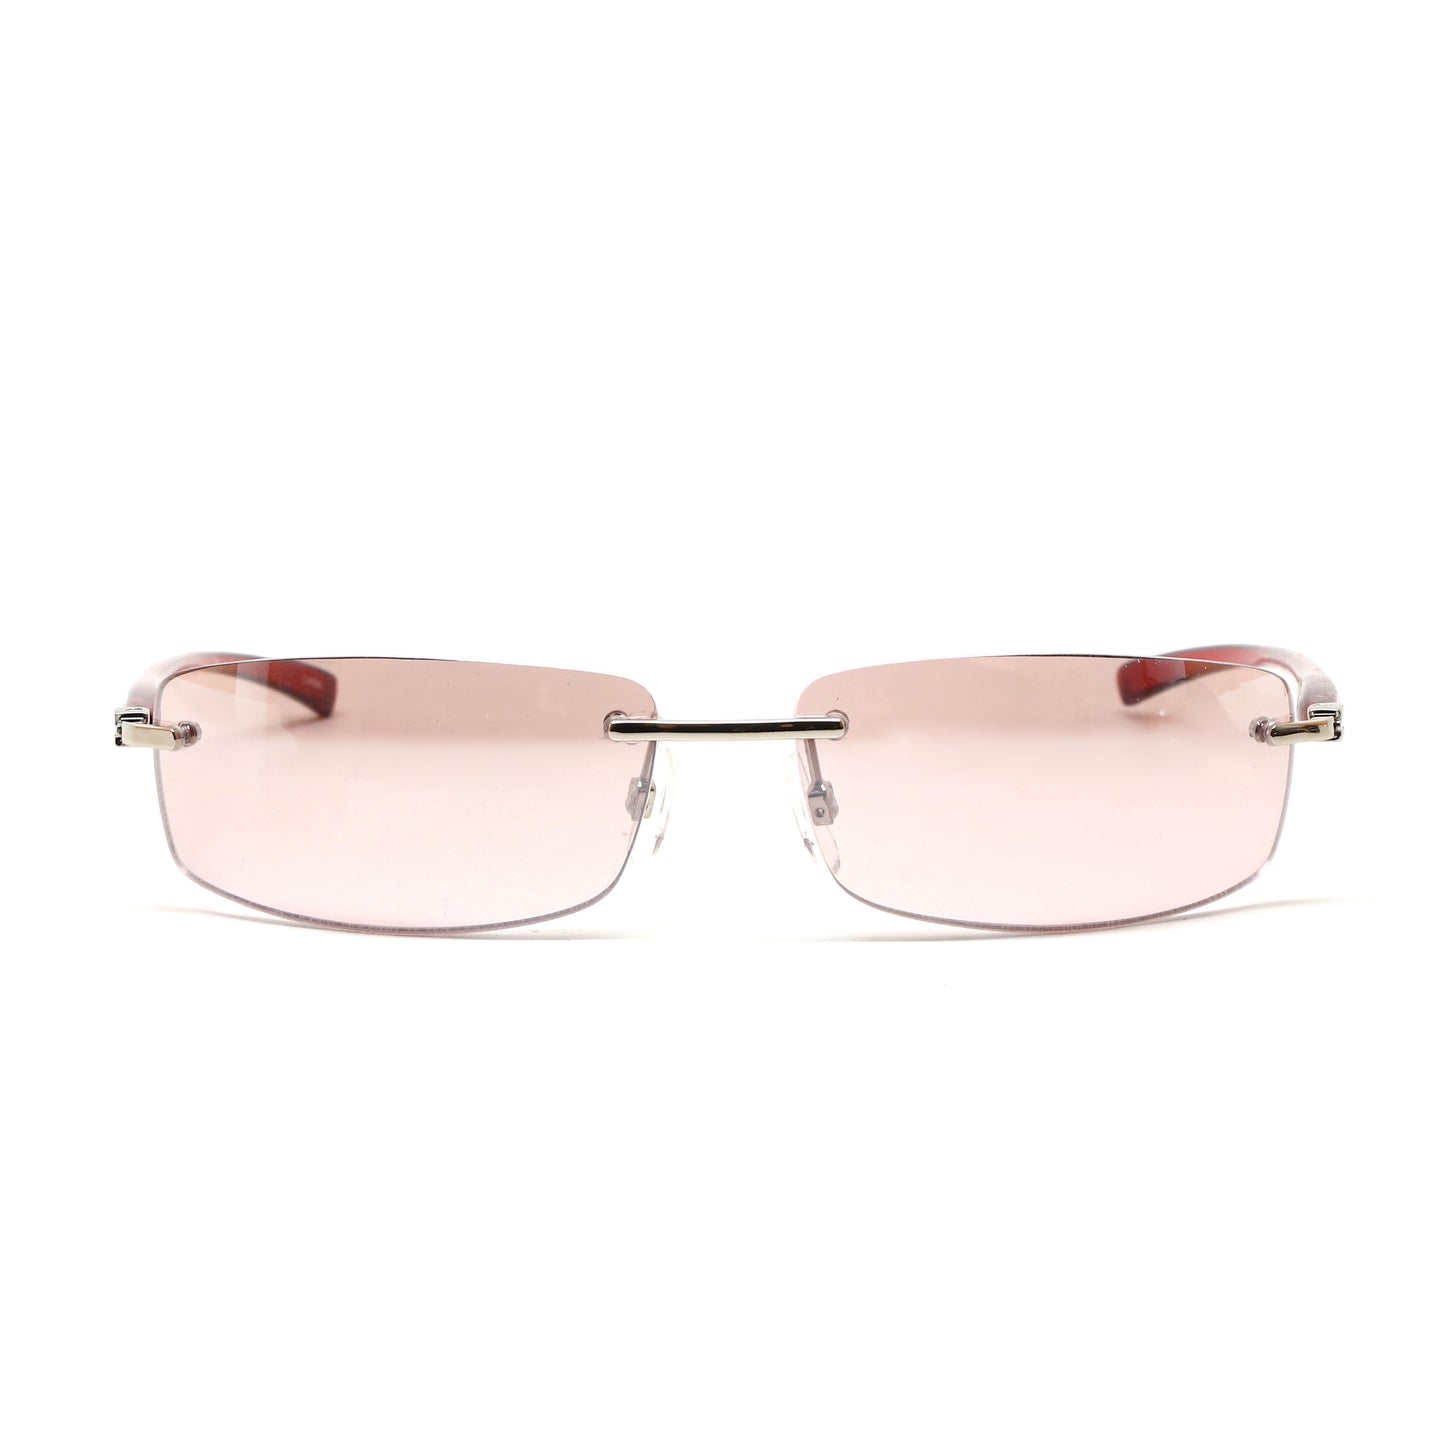 Deluxe Late 90s Vintage Frameless Rectangle Sunglasses - Pink